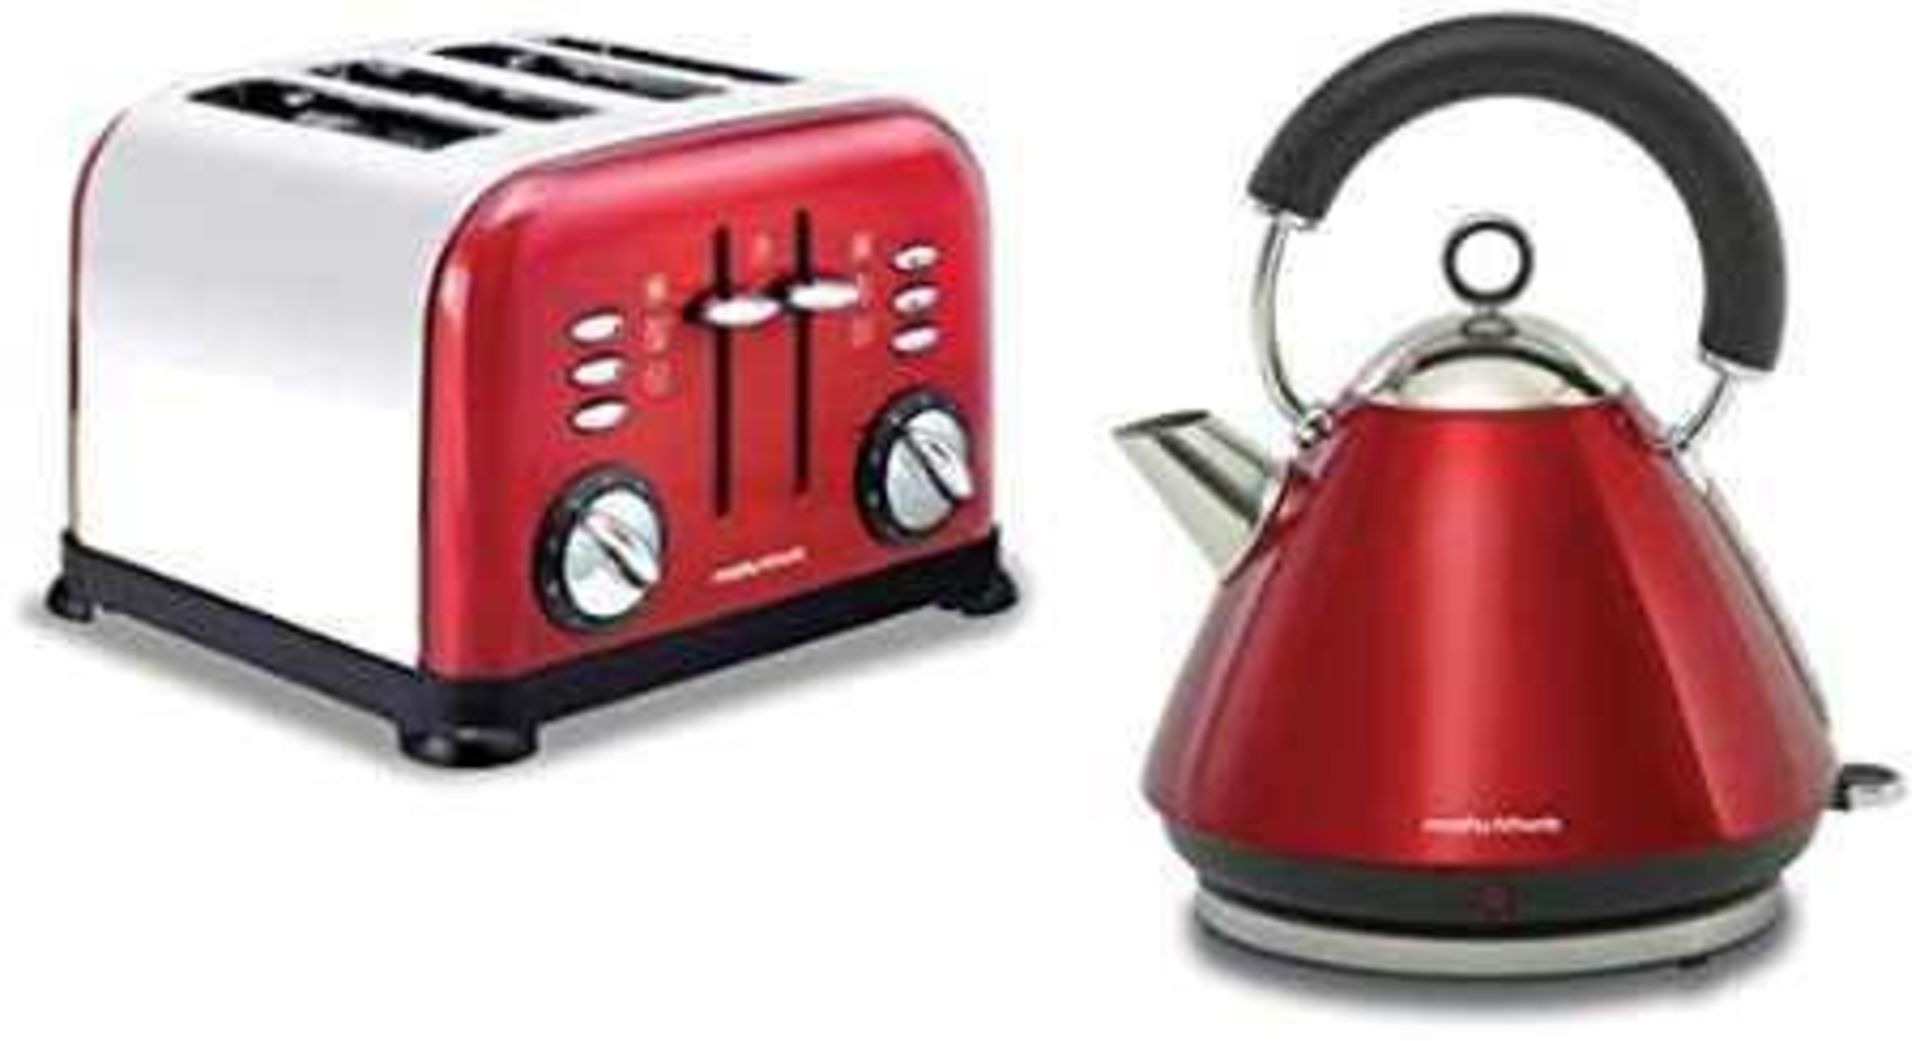 RRP £50 Each Boxed Morphy Richards Evoke 4-Slice Toaster And 1.5 L Jug Kettle In Red